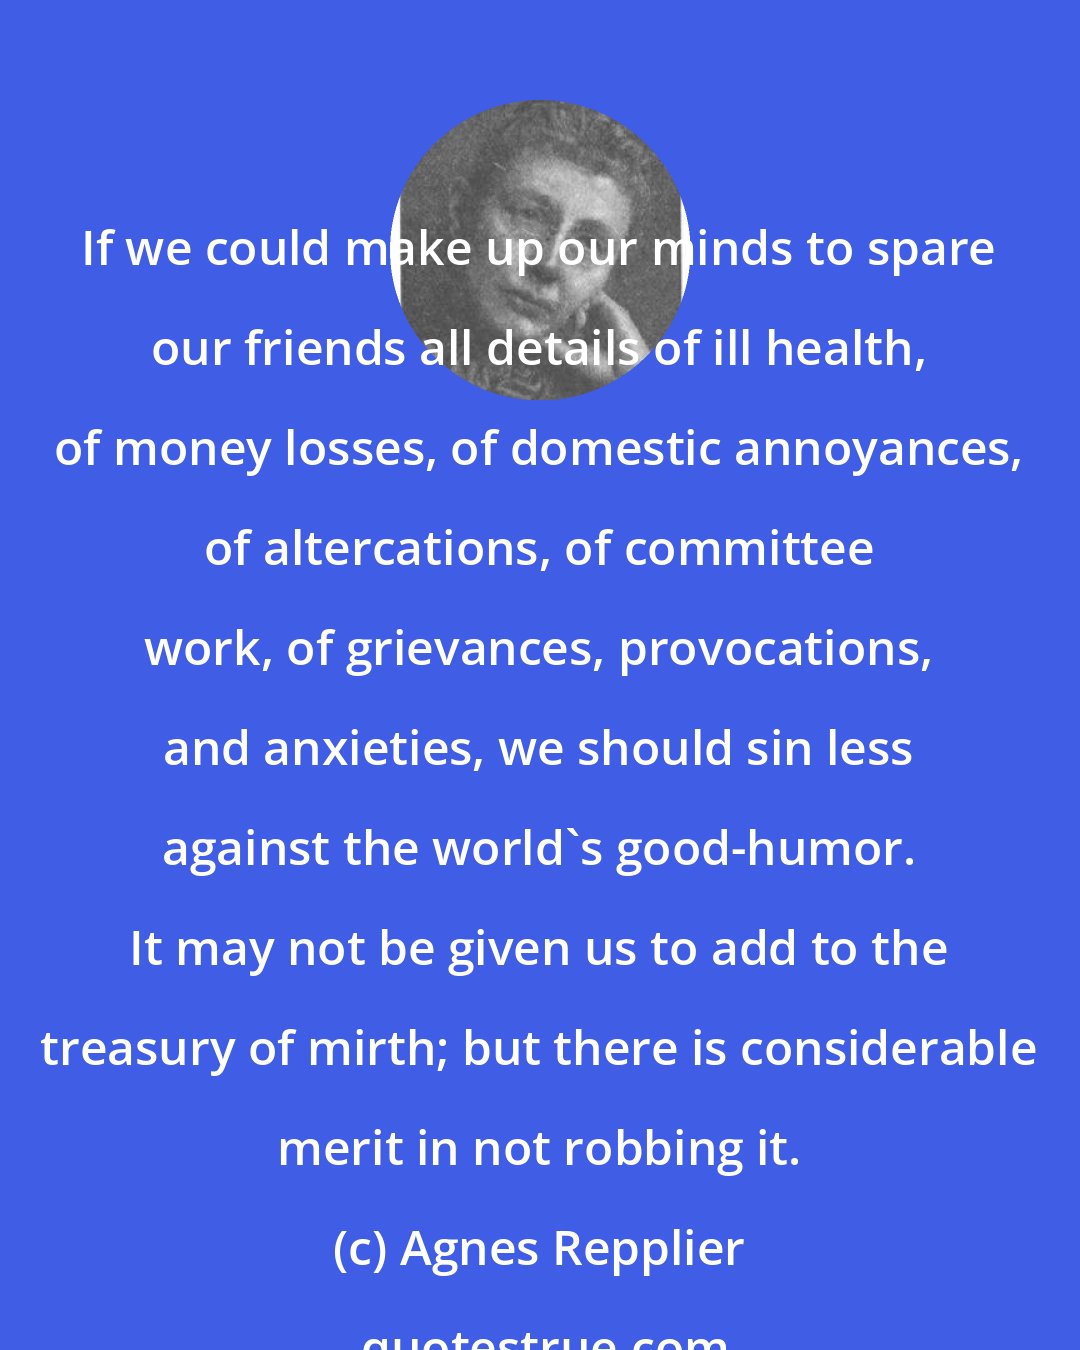 Agnes Repplier: If we could make up our minds to spare our friends all details of ill health, of money losses, of domestic annoyances, of altercations, of committee work, of grievances, provocations, and anxieties, we should sin less against the world's good-humor. It may not be given us to add to the treasury of mirth; but there is considerable merit in not robbing it.